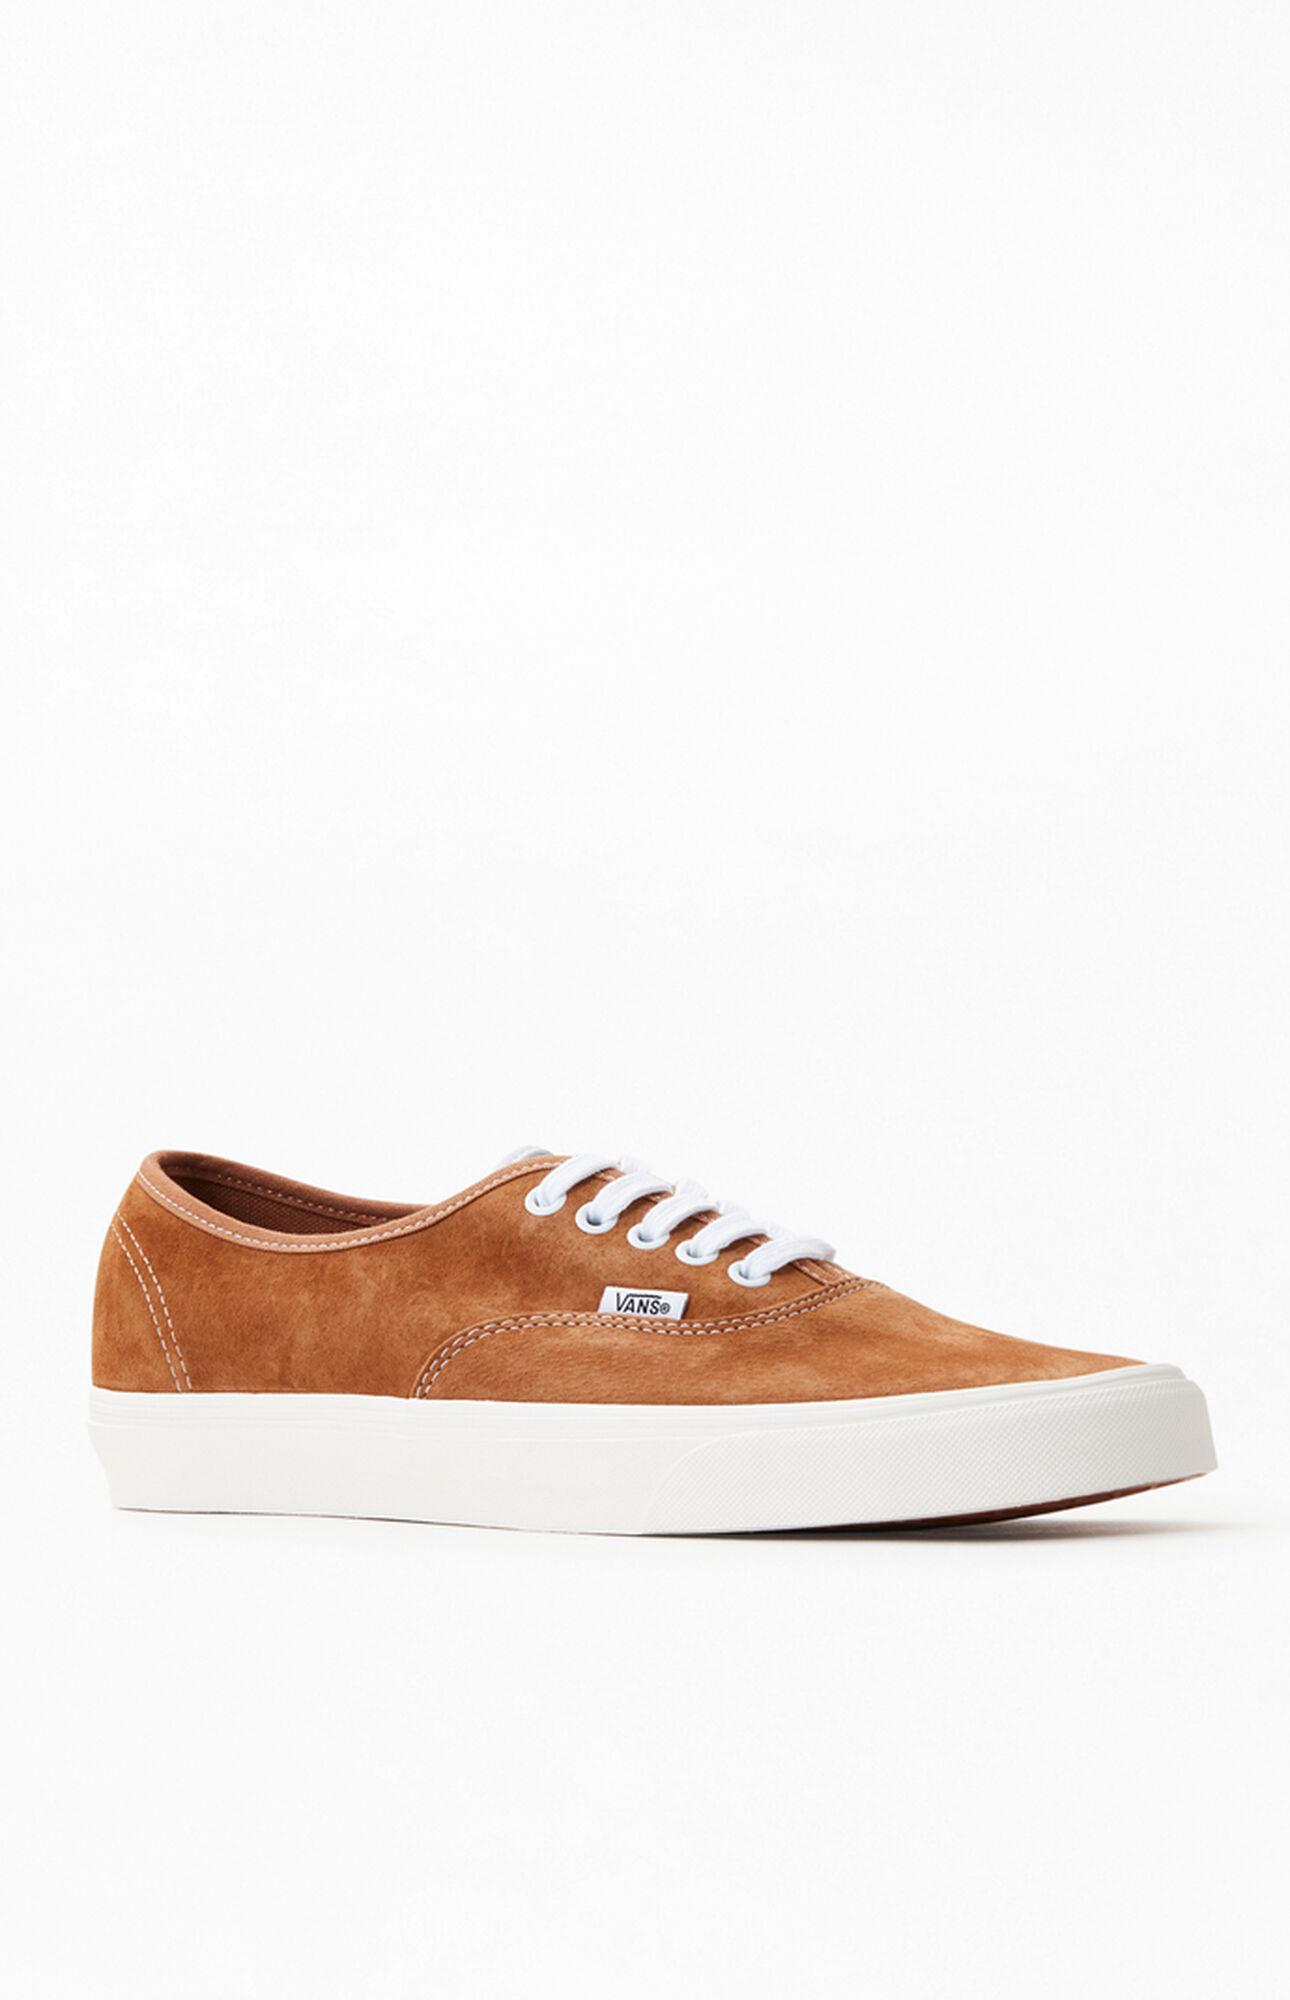 Vans Pig Suede Authentic Shoes in Light Brown (Brown) for Men - Lyst